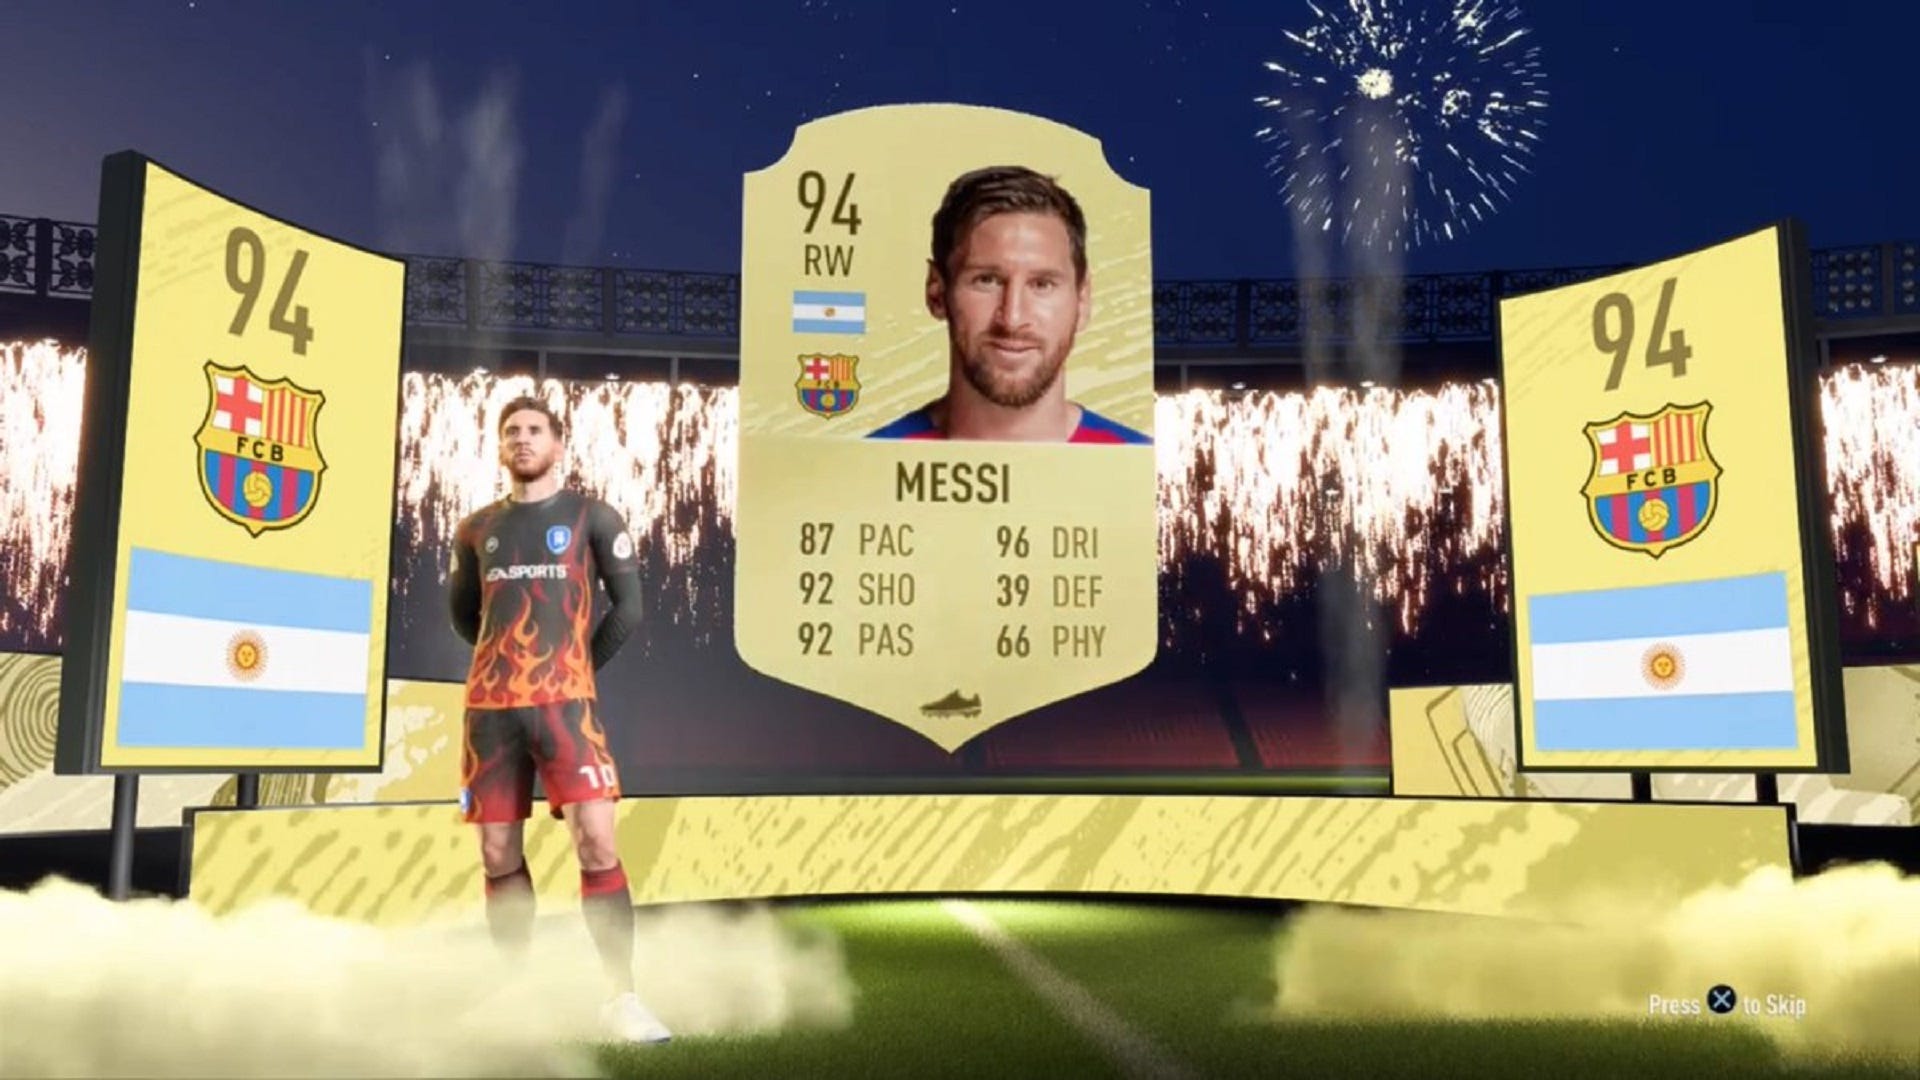 FIFA 20 Ultimate Team Pack Odds: What are the chances of getting Ronaldo or Messi in a pack? | Goal.com English Oman